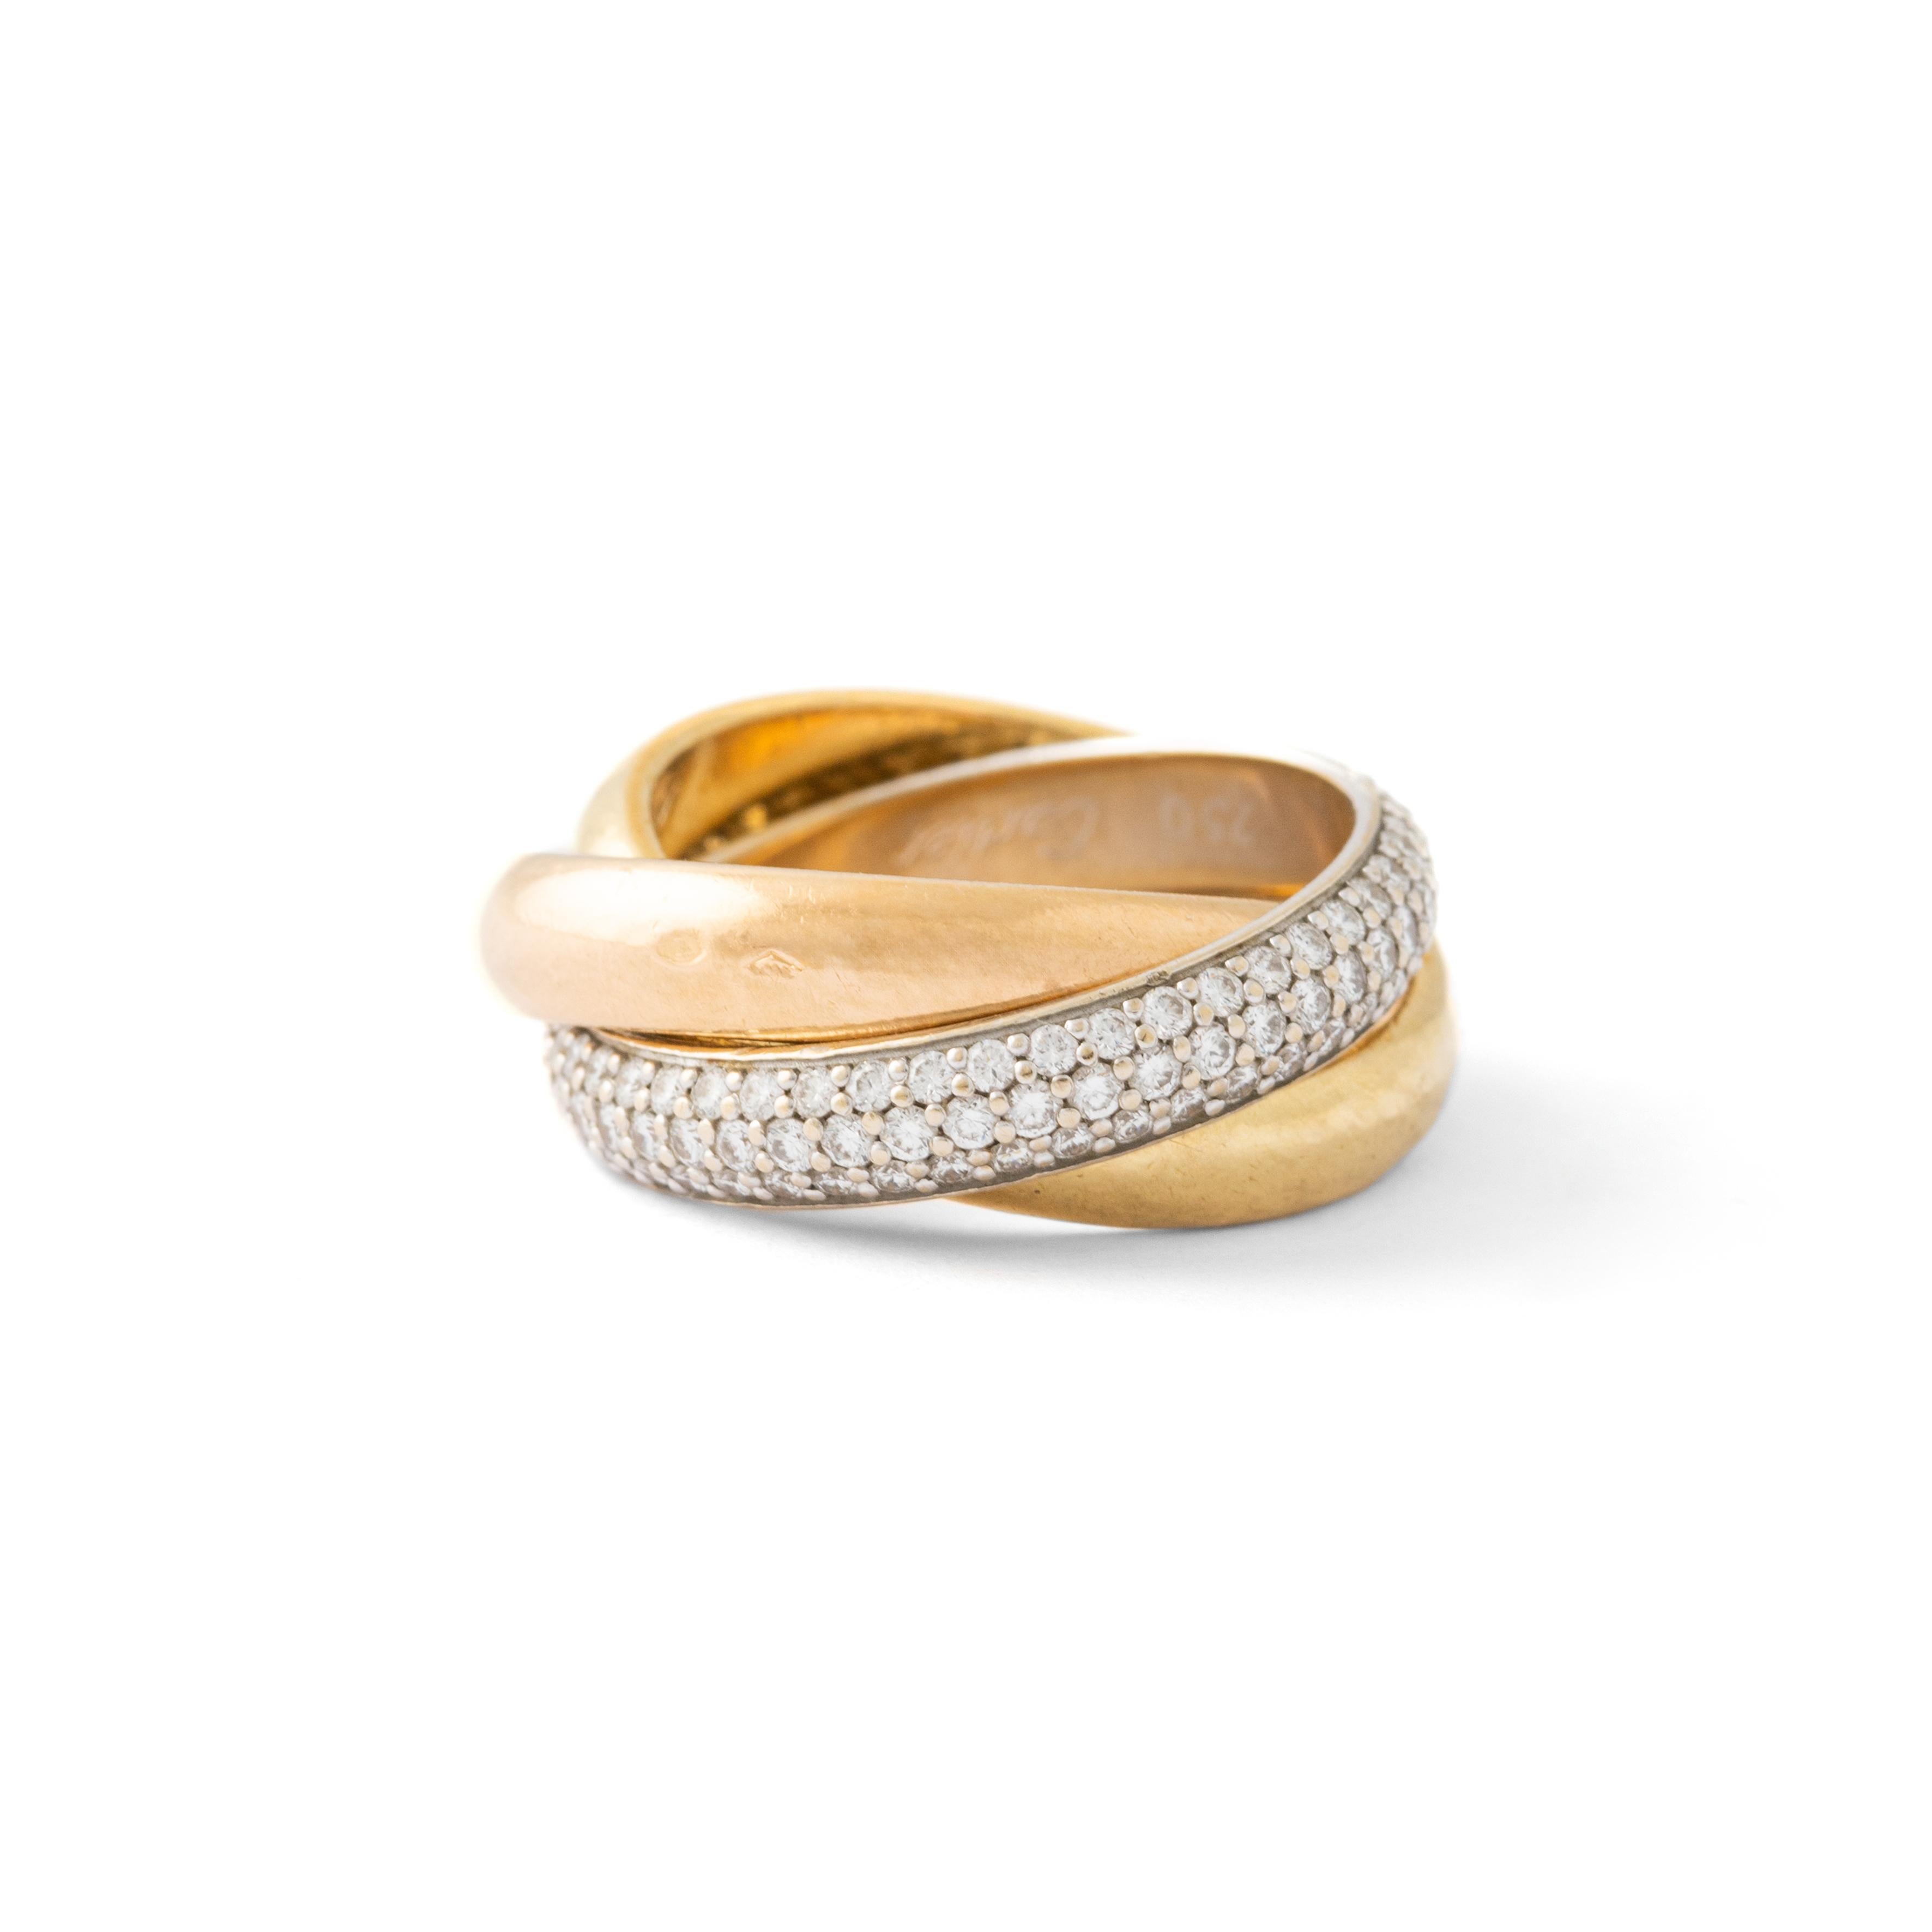 A classic Cartier diamond trinity ring set in 18k yellow, rose and white gold.

The ring is composed of three interlinked bands that are designed to roll with ease on the finger. The colour difference is subtle yet beautiful and the trinity is a